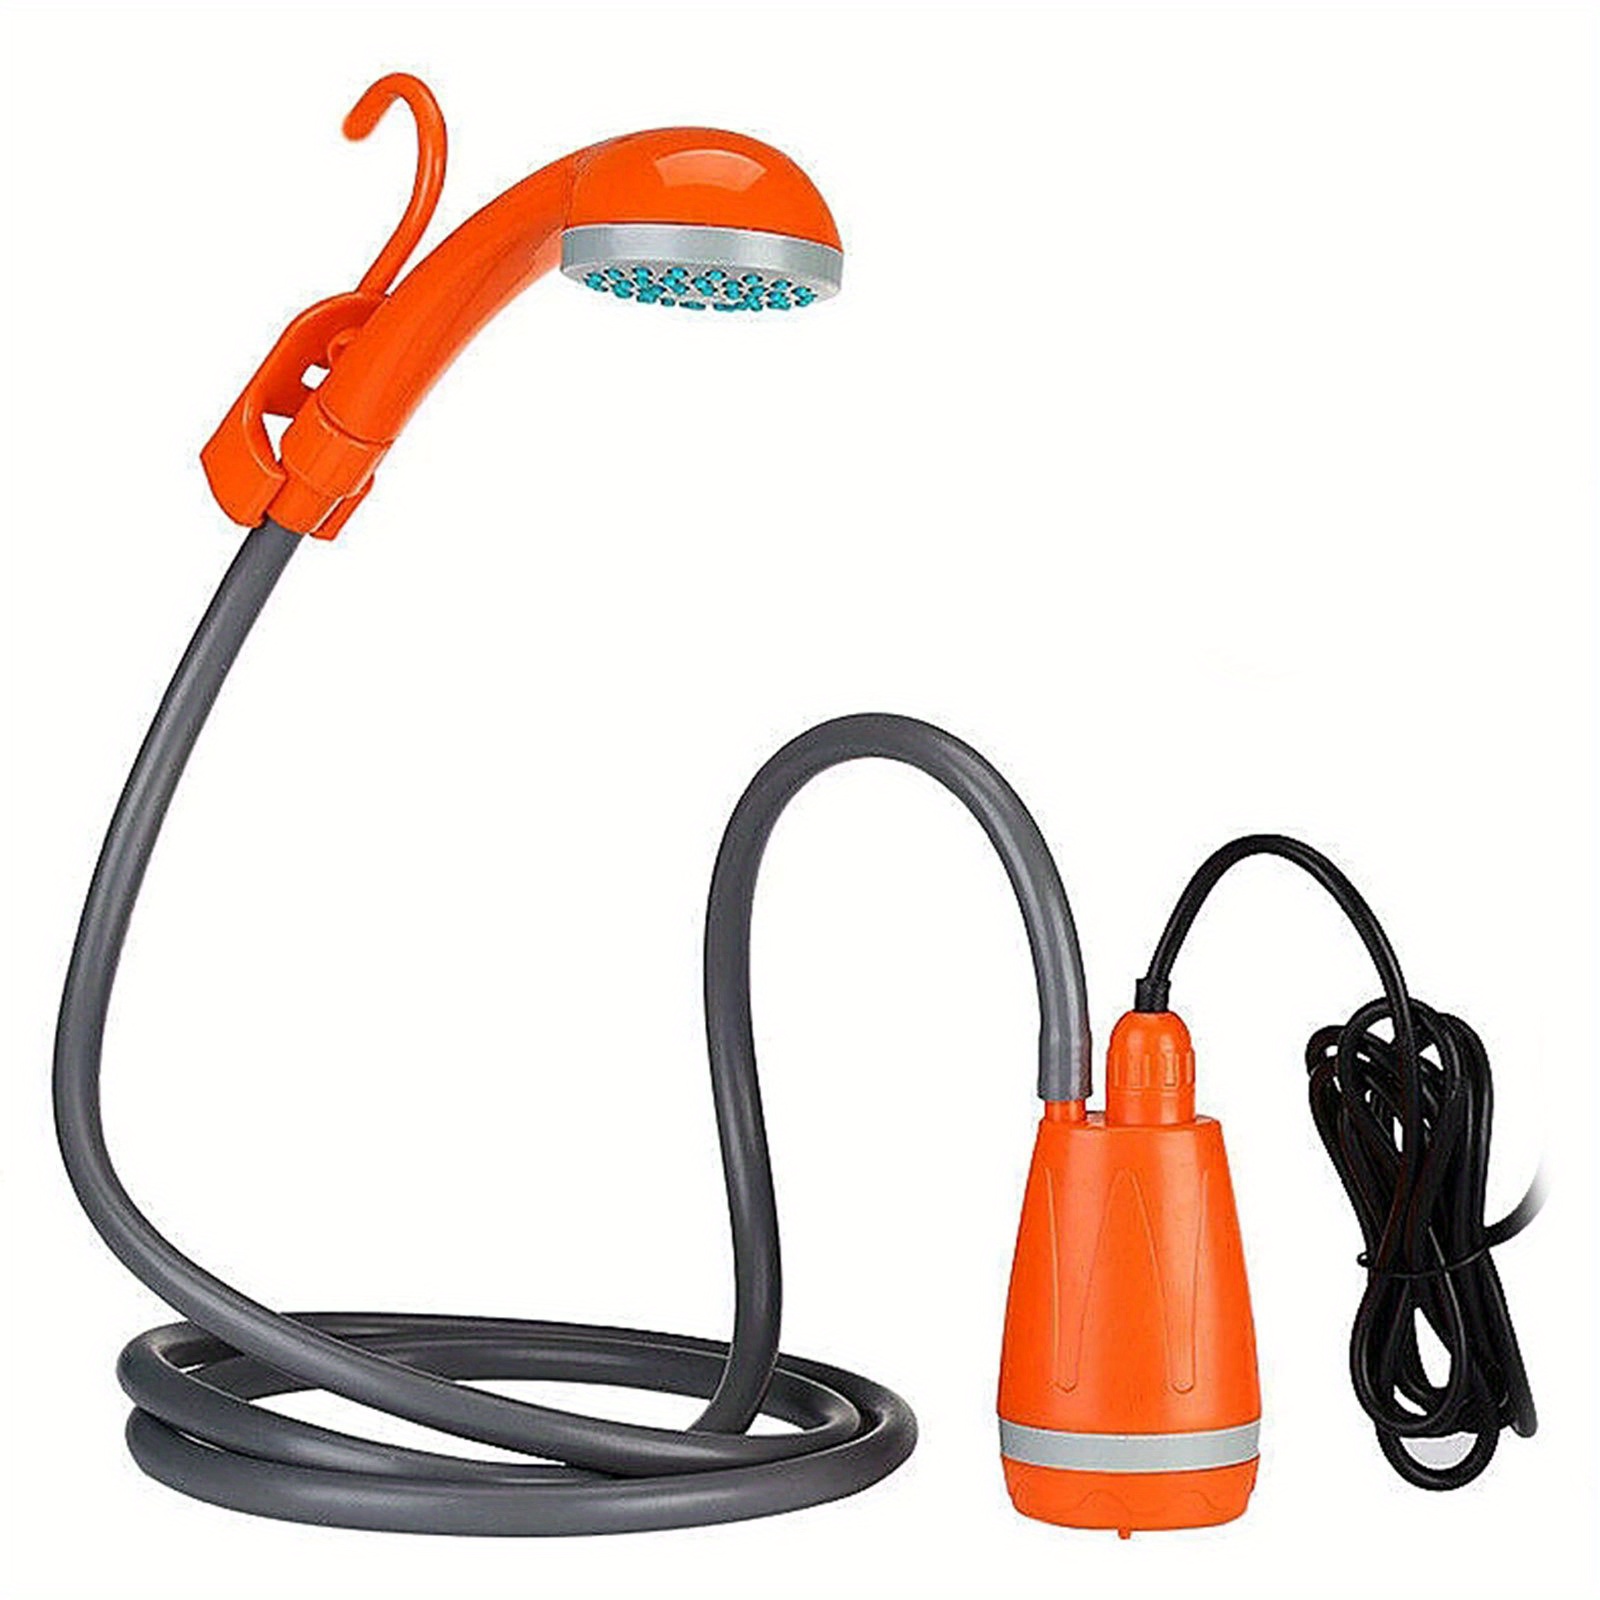 

Portable Outdoor Camping Shower Head With Water Pump - 5l/min